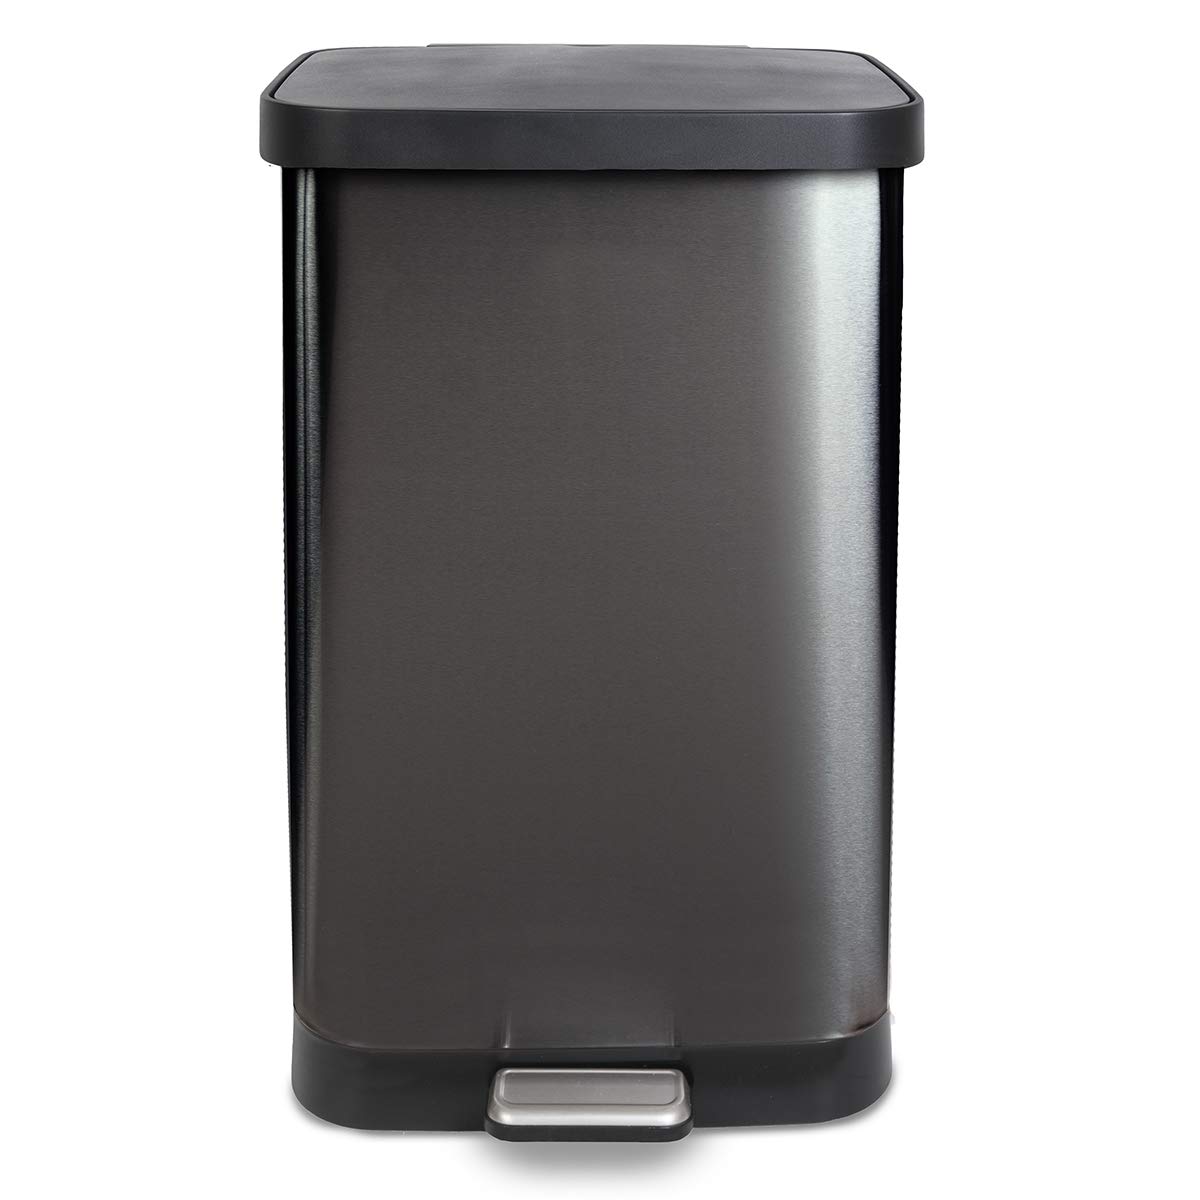 Glad 20 Gallon / 75.5 Liter Extra Capacity Stainless Steel Step Trash Can with CloroxTM Odor Protection, Pewter